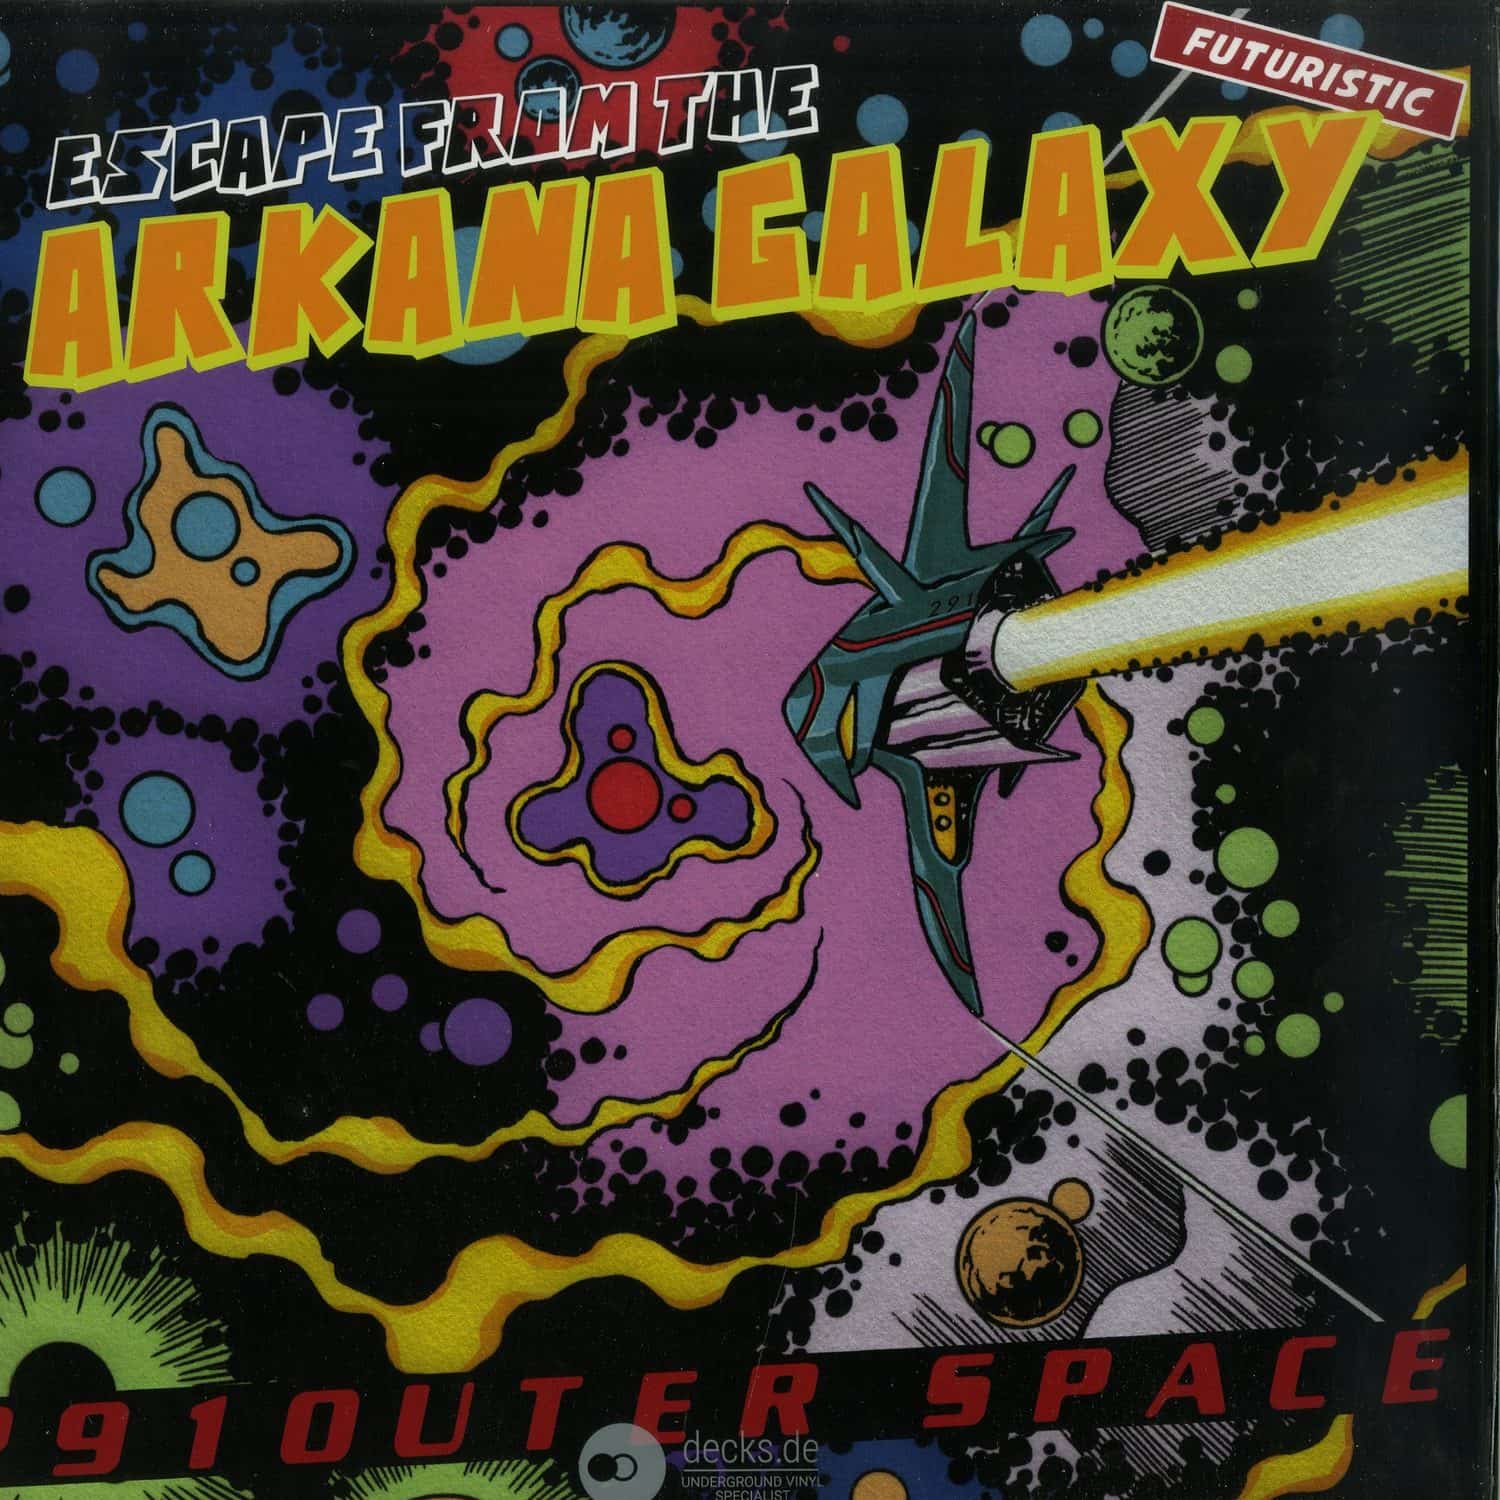 291outer Space - ESCAPE FROM THE ARKANA GALAXY 